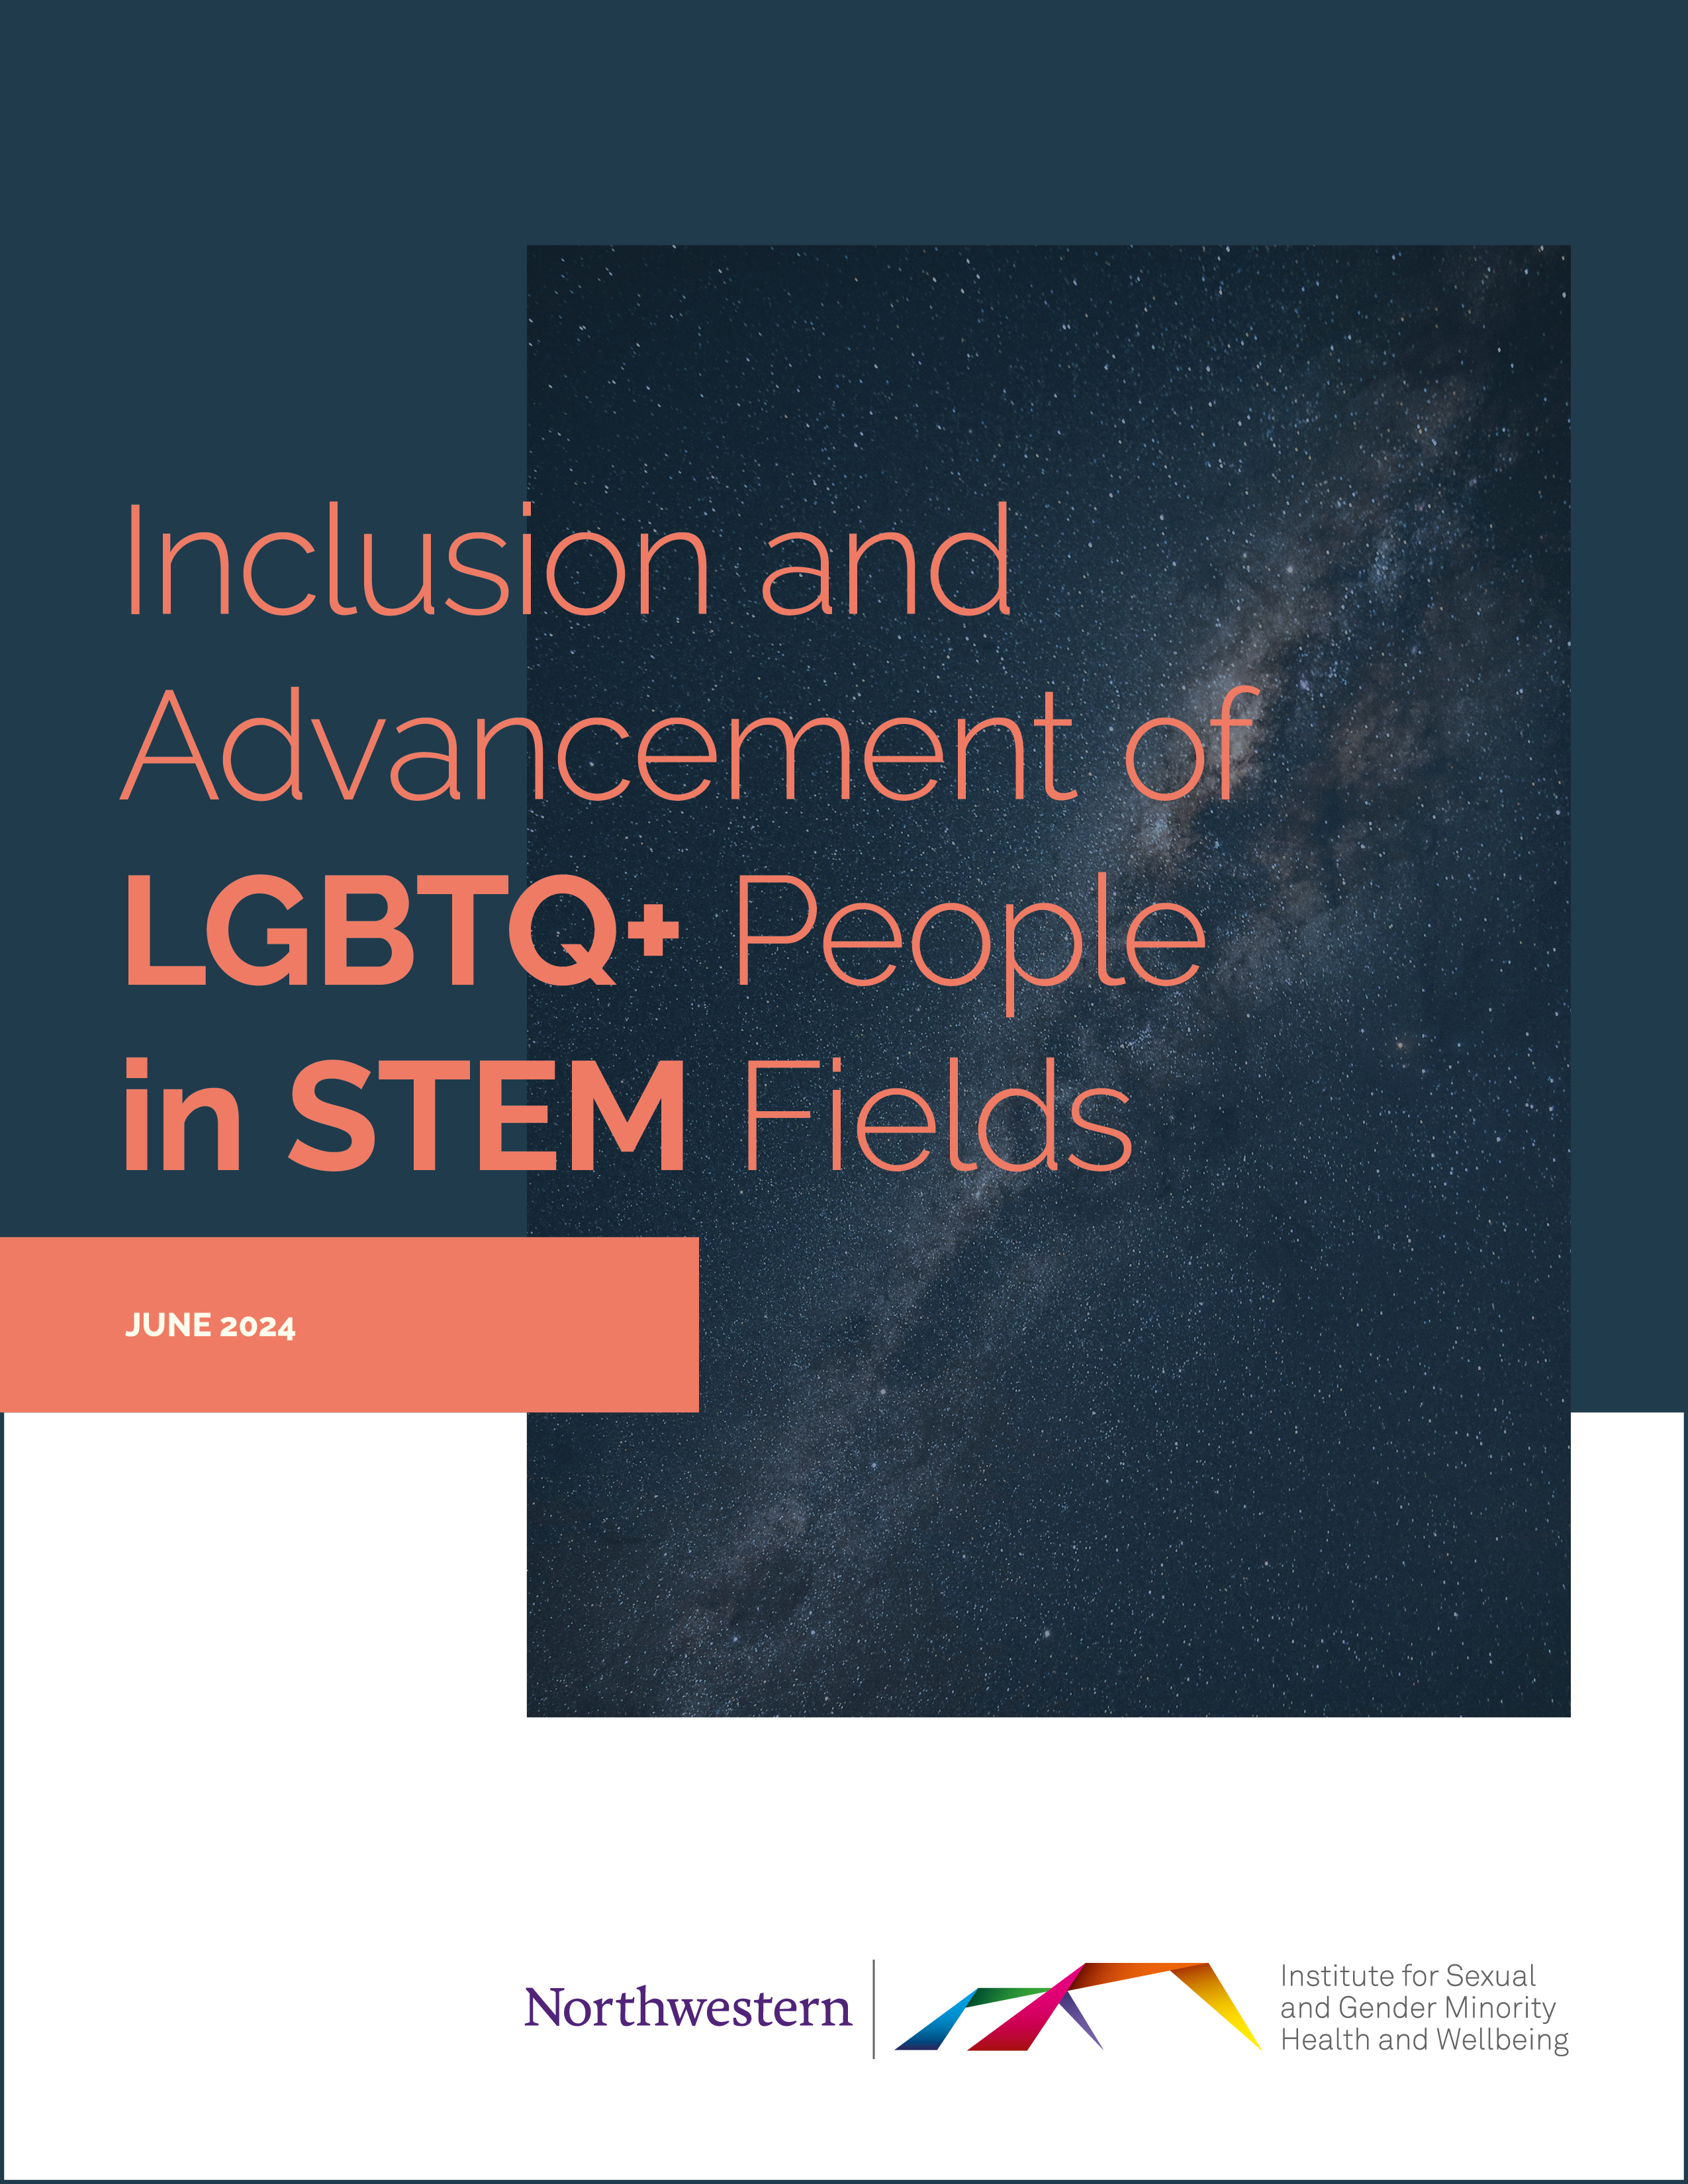 Inclusion and Advancement of LGBTQ+ People in STEM Fields. June 2024. Northwestern Institute for Sexual and Gender Minority Health and Wellbeing.